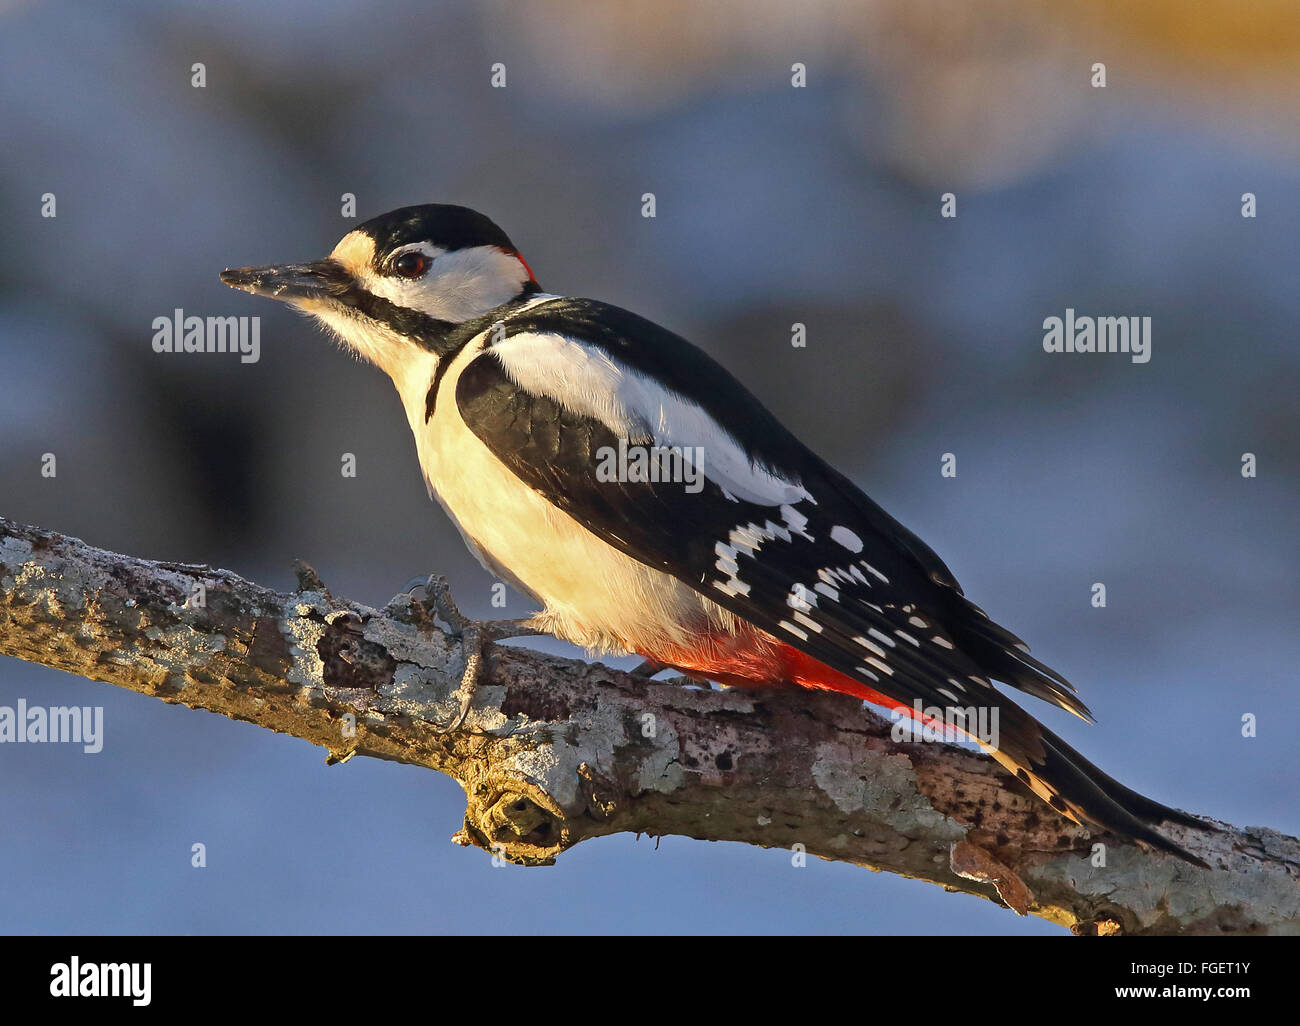 Great spotted woodpecker / Colorful birds Stock Photo